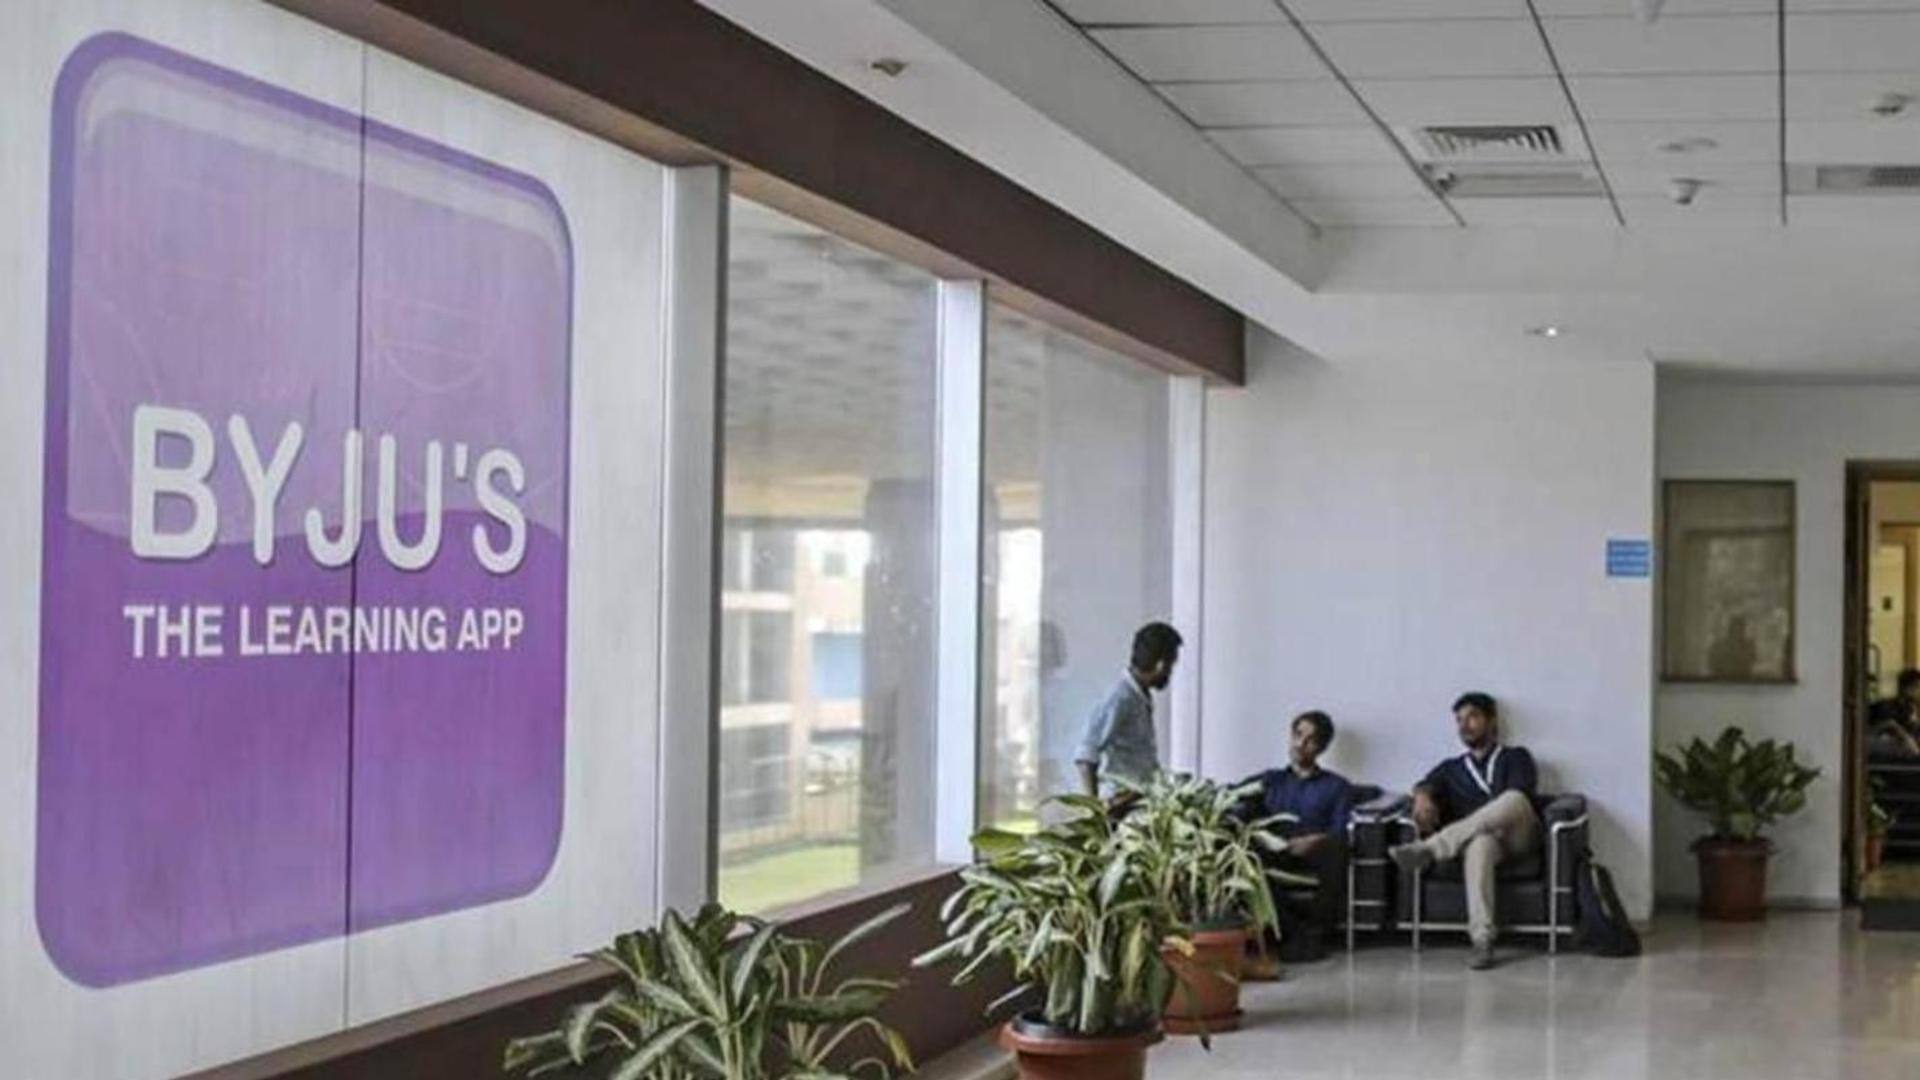 Why is BYJU'S raising $250 million at a lower valuation